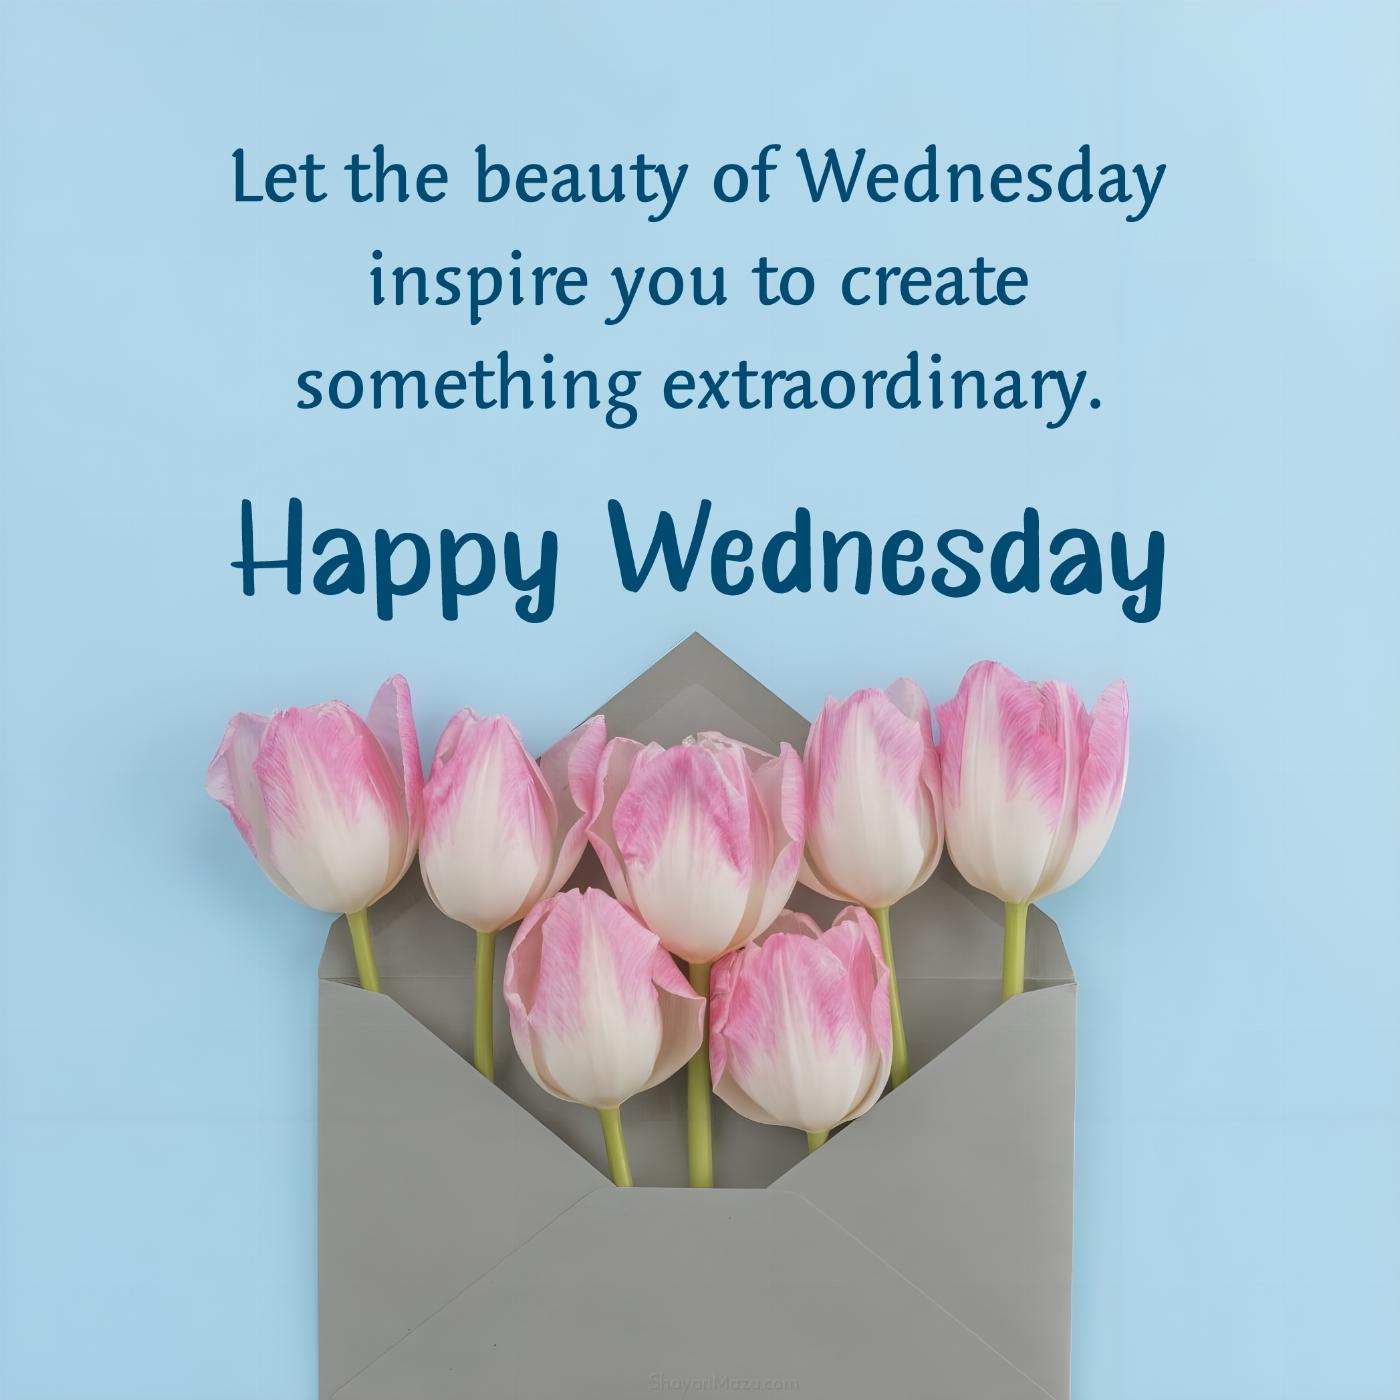 Let the beauty of Wednesday inspire you to create something extraordinary